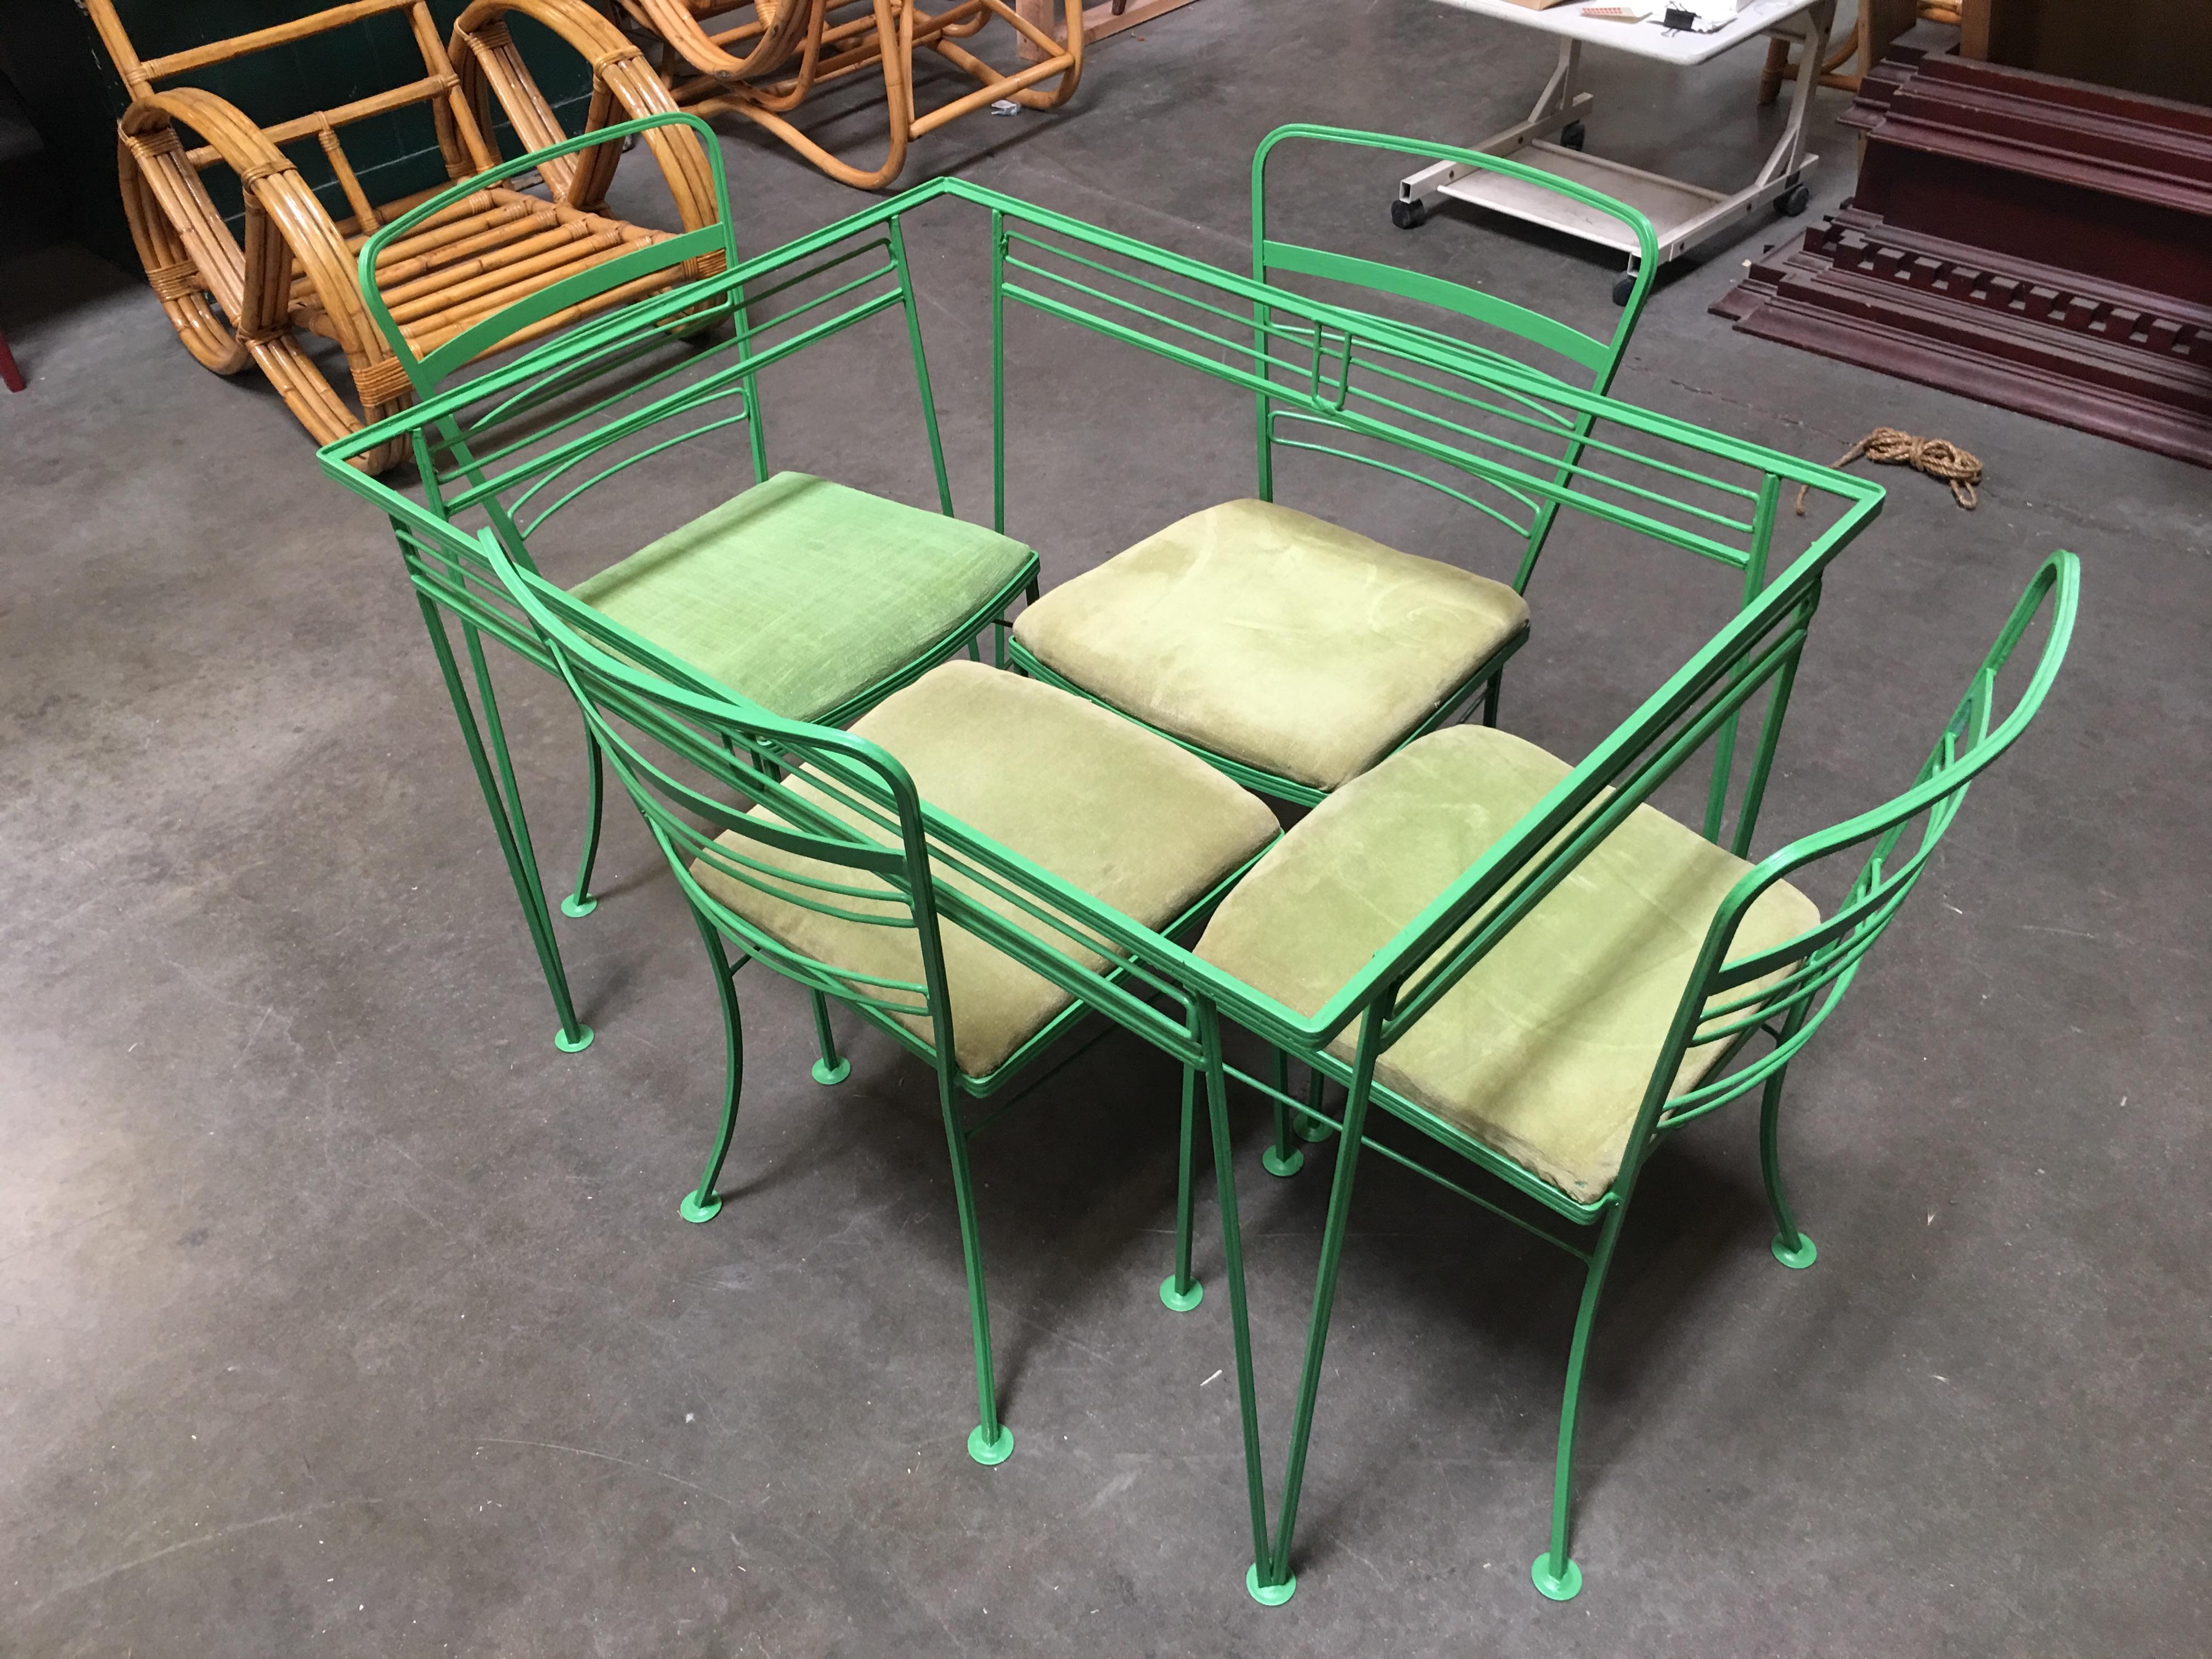 Woodard wrought iron Art Deco patio/outdoor set featuring four side chairs and one glass top dining table. This set is current repainted in green but be changed to your color of choice, included in the price. Measurements: Chairs H 33 in. x W 18 in.